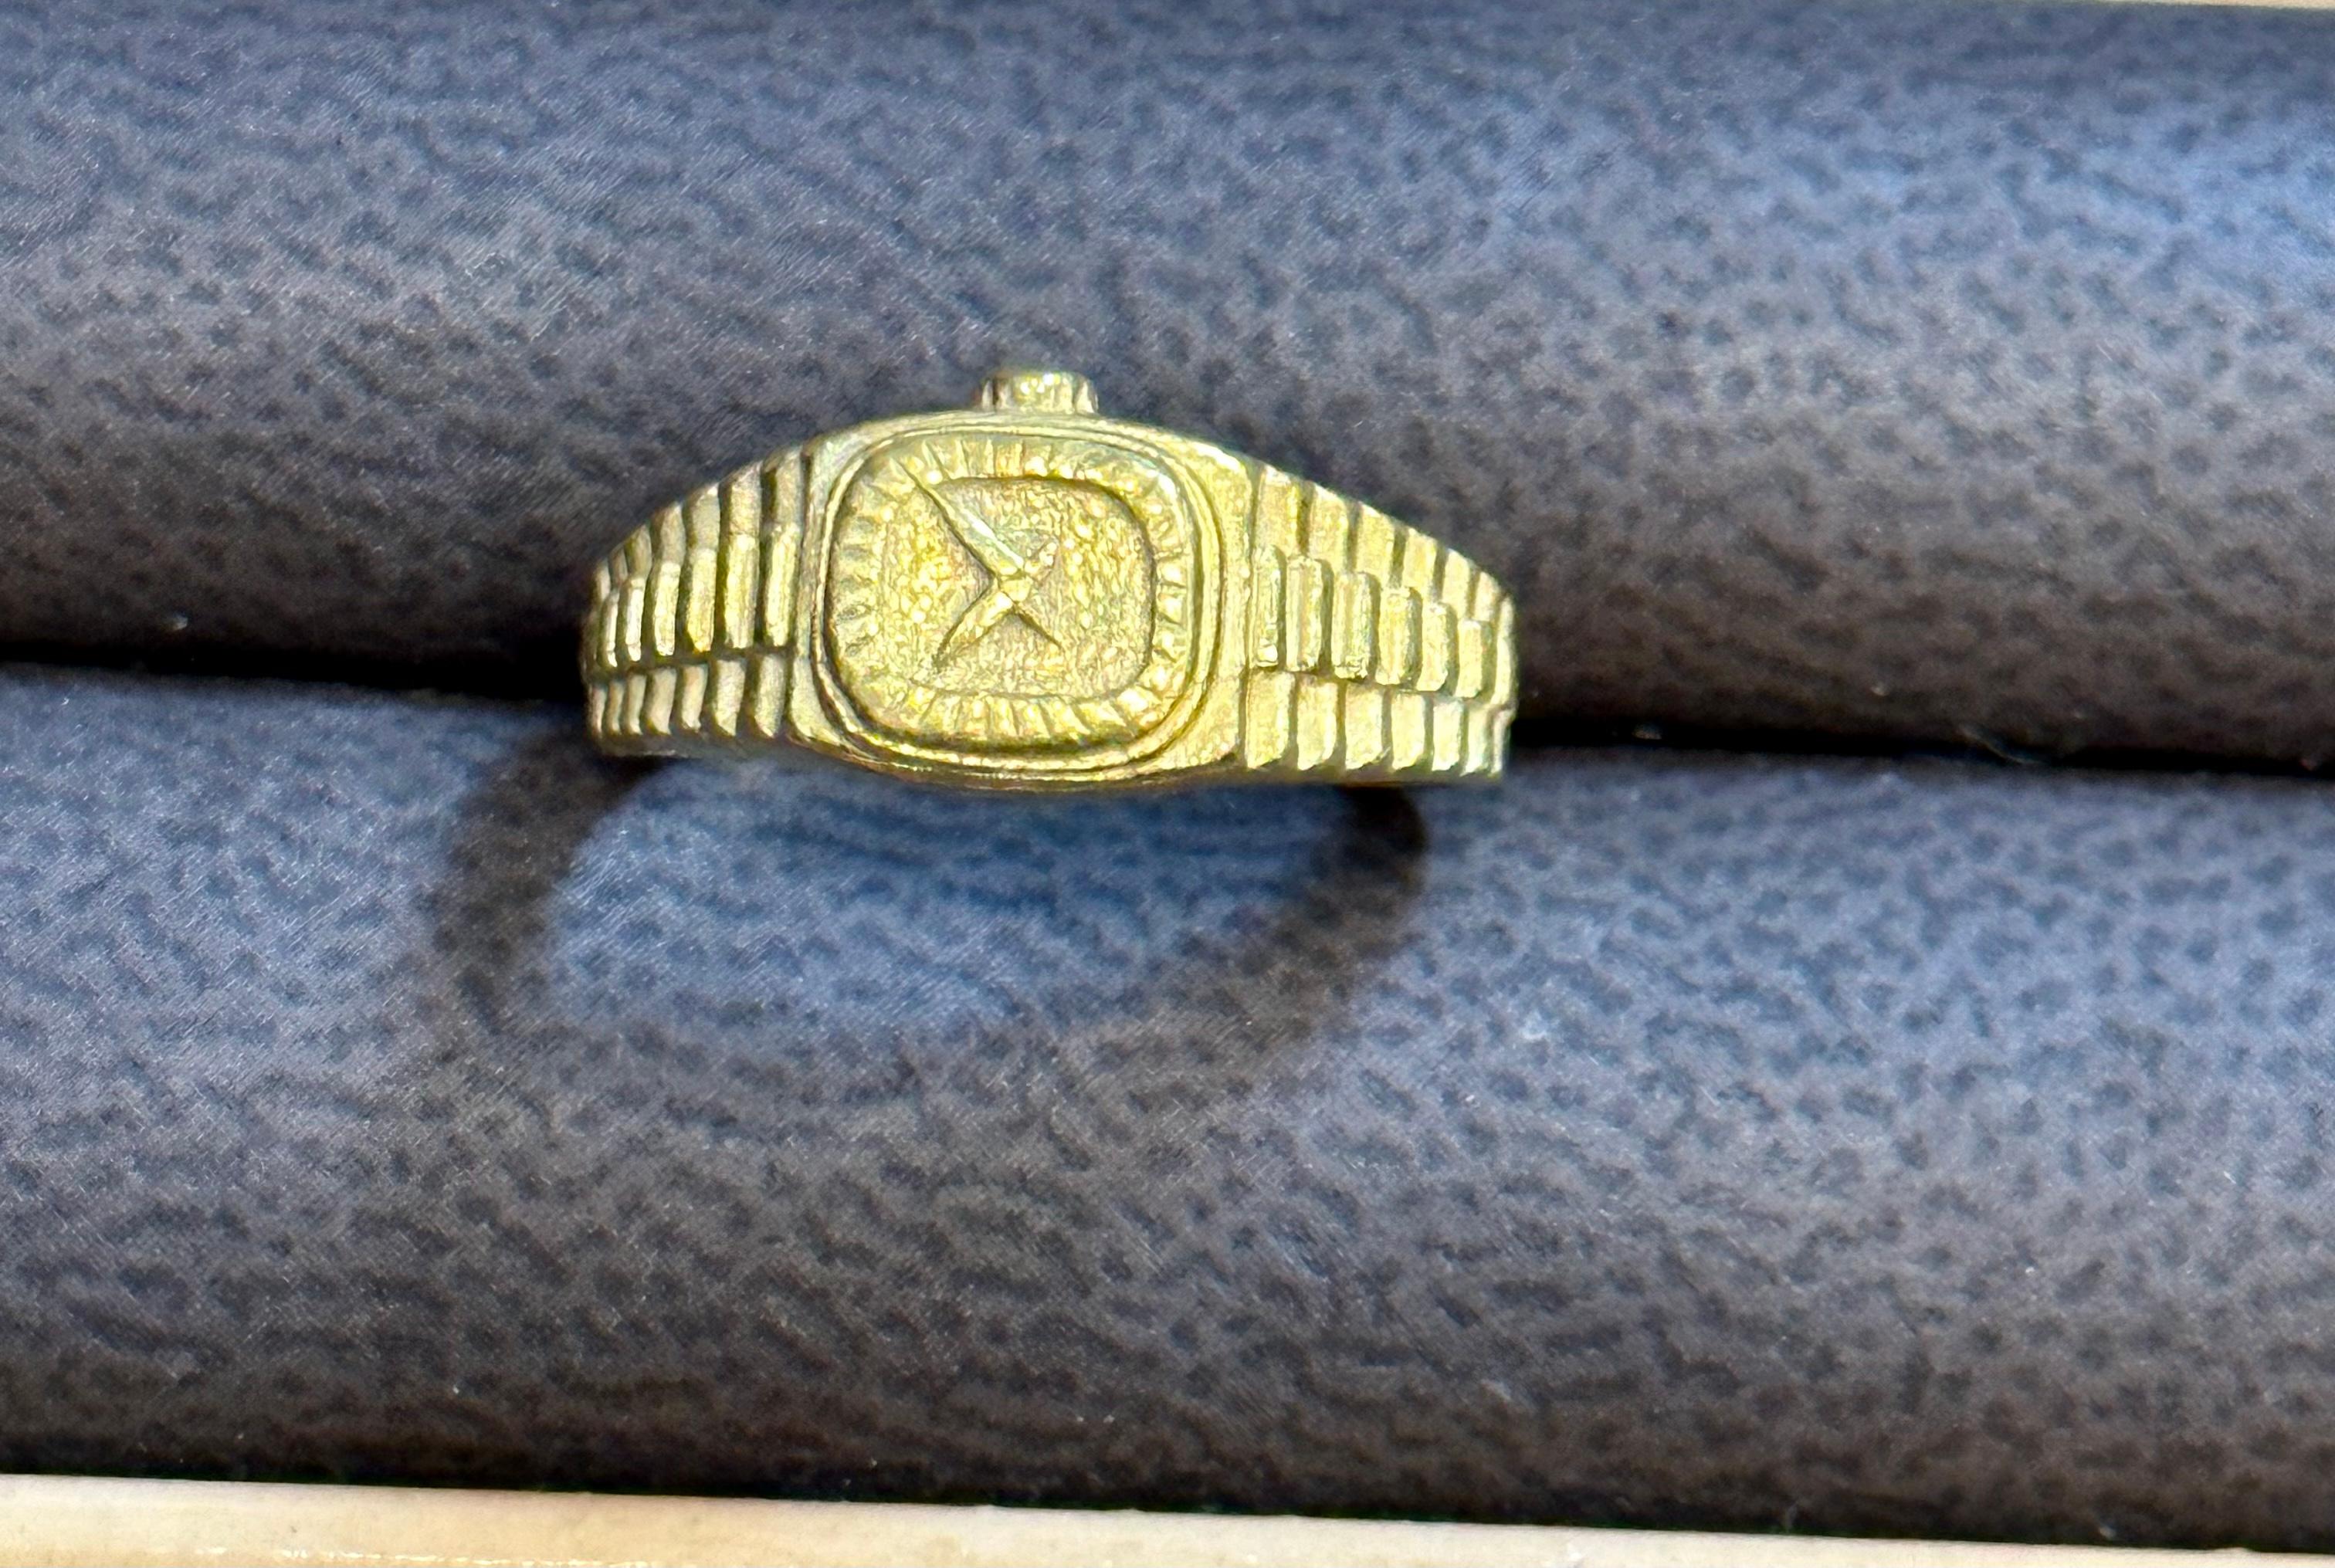 Vintage 24 Karat Yellow Gold 5.1 Gm  Rolex Design Ring Size 5.5

Weight of the Ring is 5.1 Grams 
stamped 99 
Made in Thailand
Please look at all the pictures
Its very hard to capture the true color and luster of the Necklace , I have tried to add